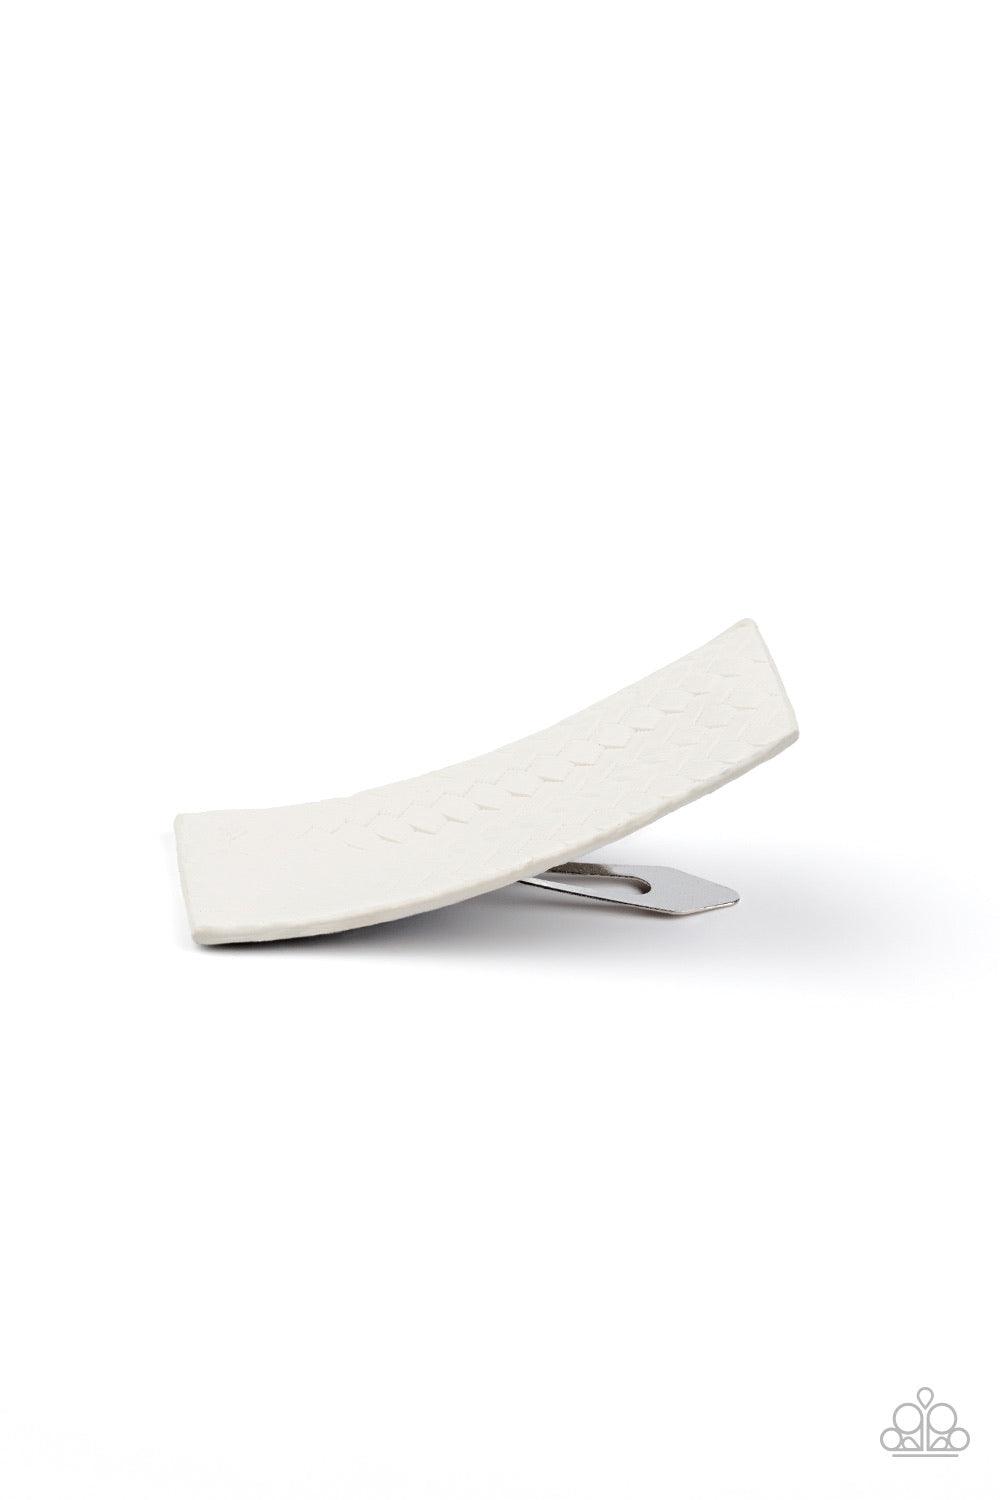 Paparazzi Accessories Let Your Hair Down - White Featuring a wicker-like pattern, a white leather hair clip pins back the hair for a casual look. Features a standard snap hair clip on the back. Hair Accessories